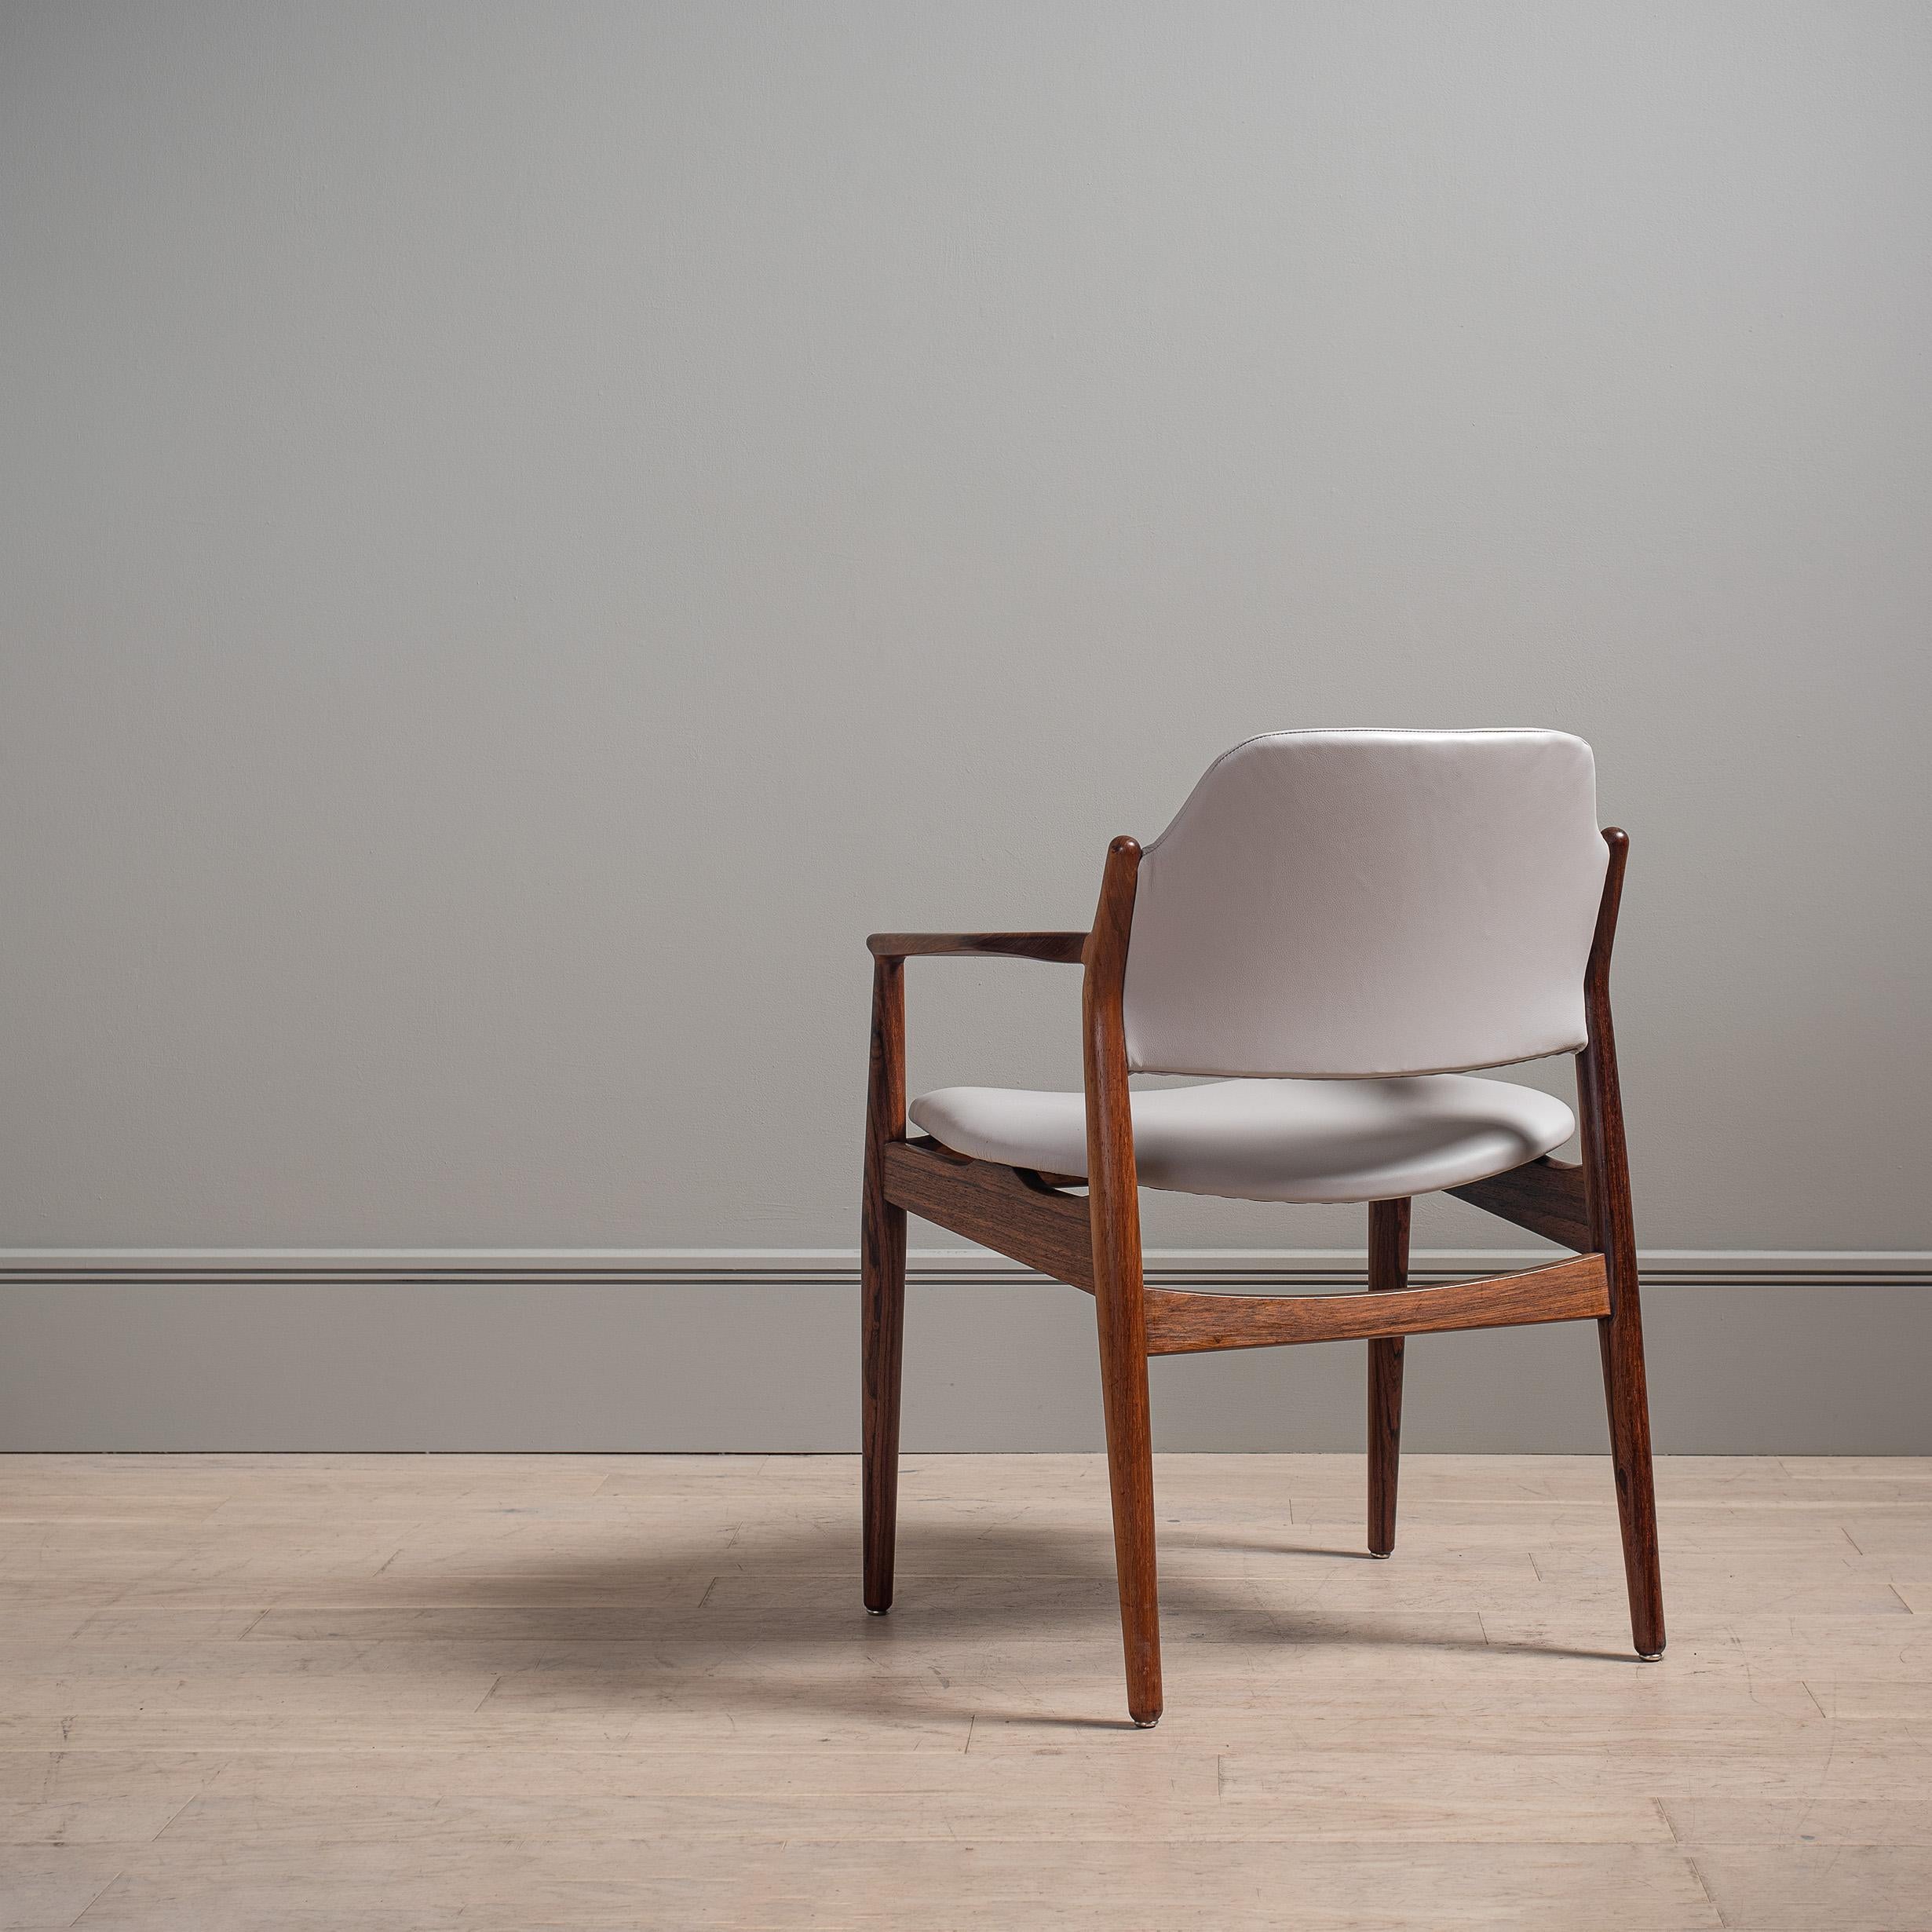 Arne Vodder Leather Chair, Sibast, Danish 1960 In Good Condition For Sale In London, GB